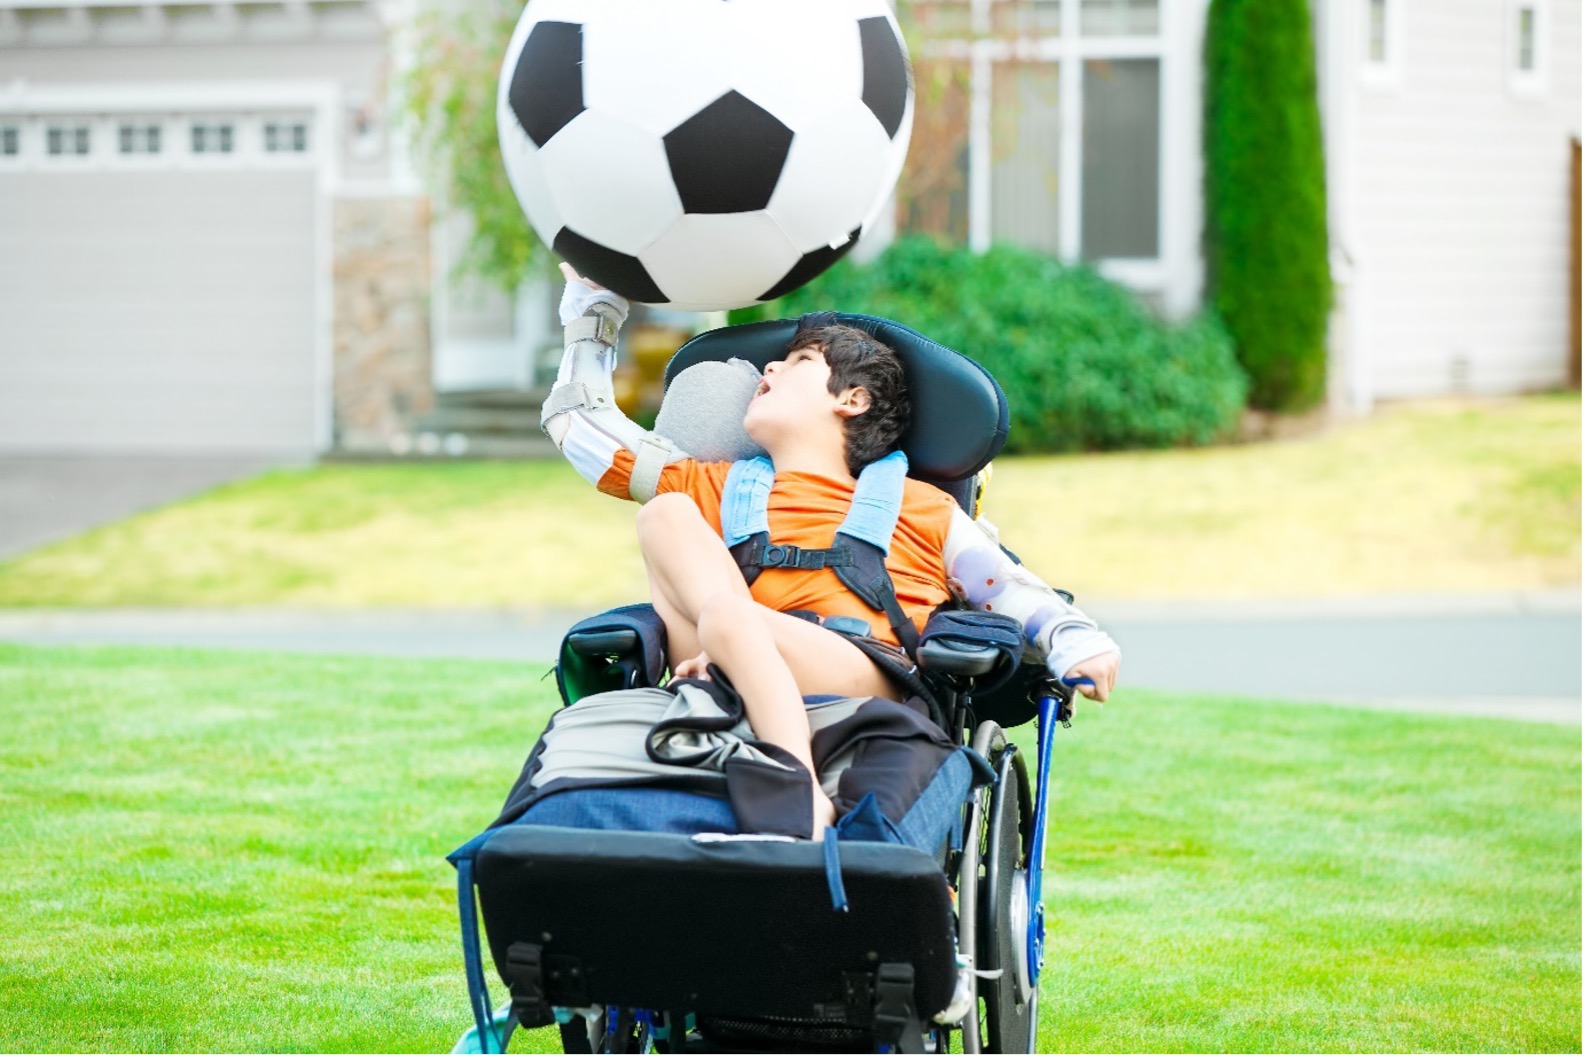 A young boy with disability seated in a blue wheelchair playing with an oversized soccer ball. 